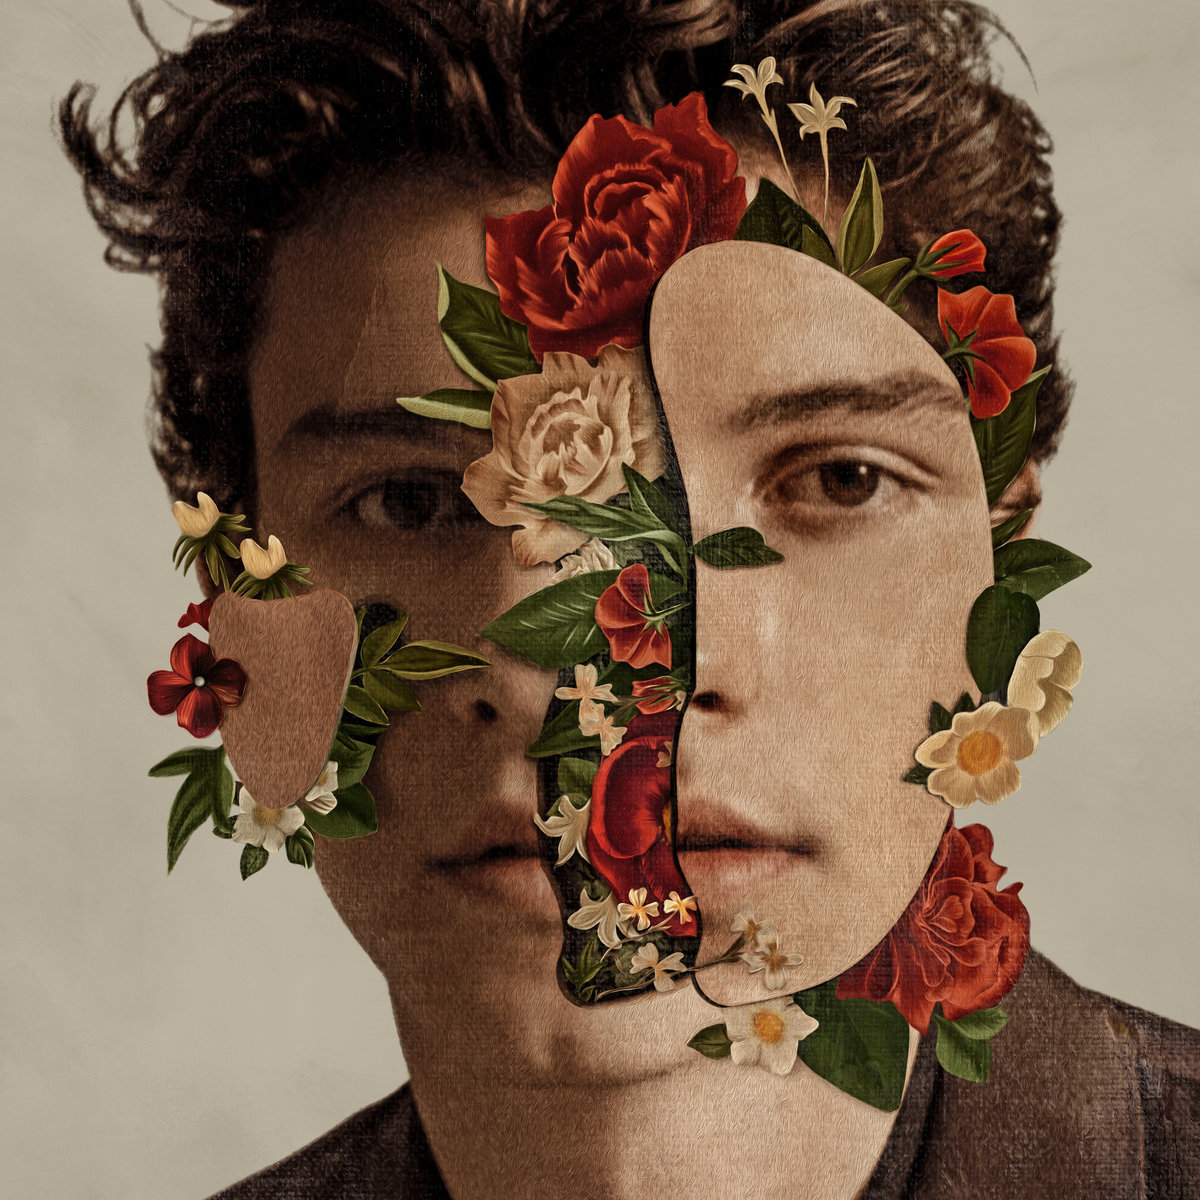 MENDES SHAWN – Shawn Mendes